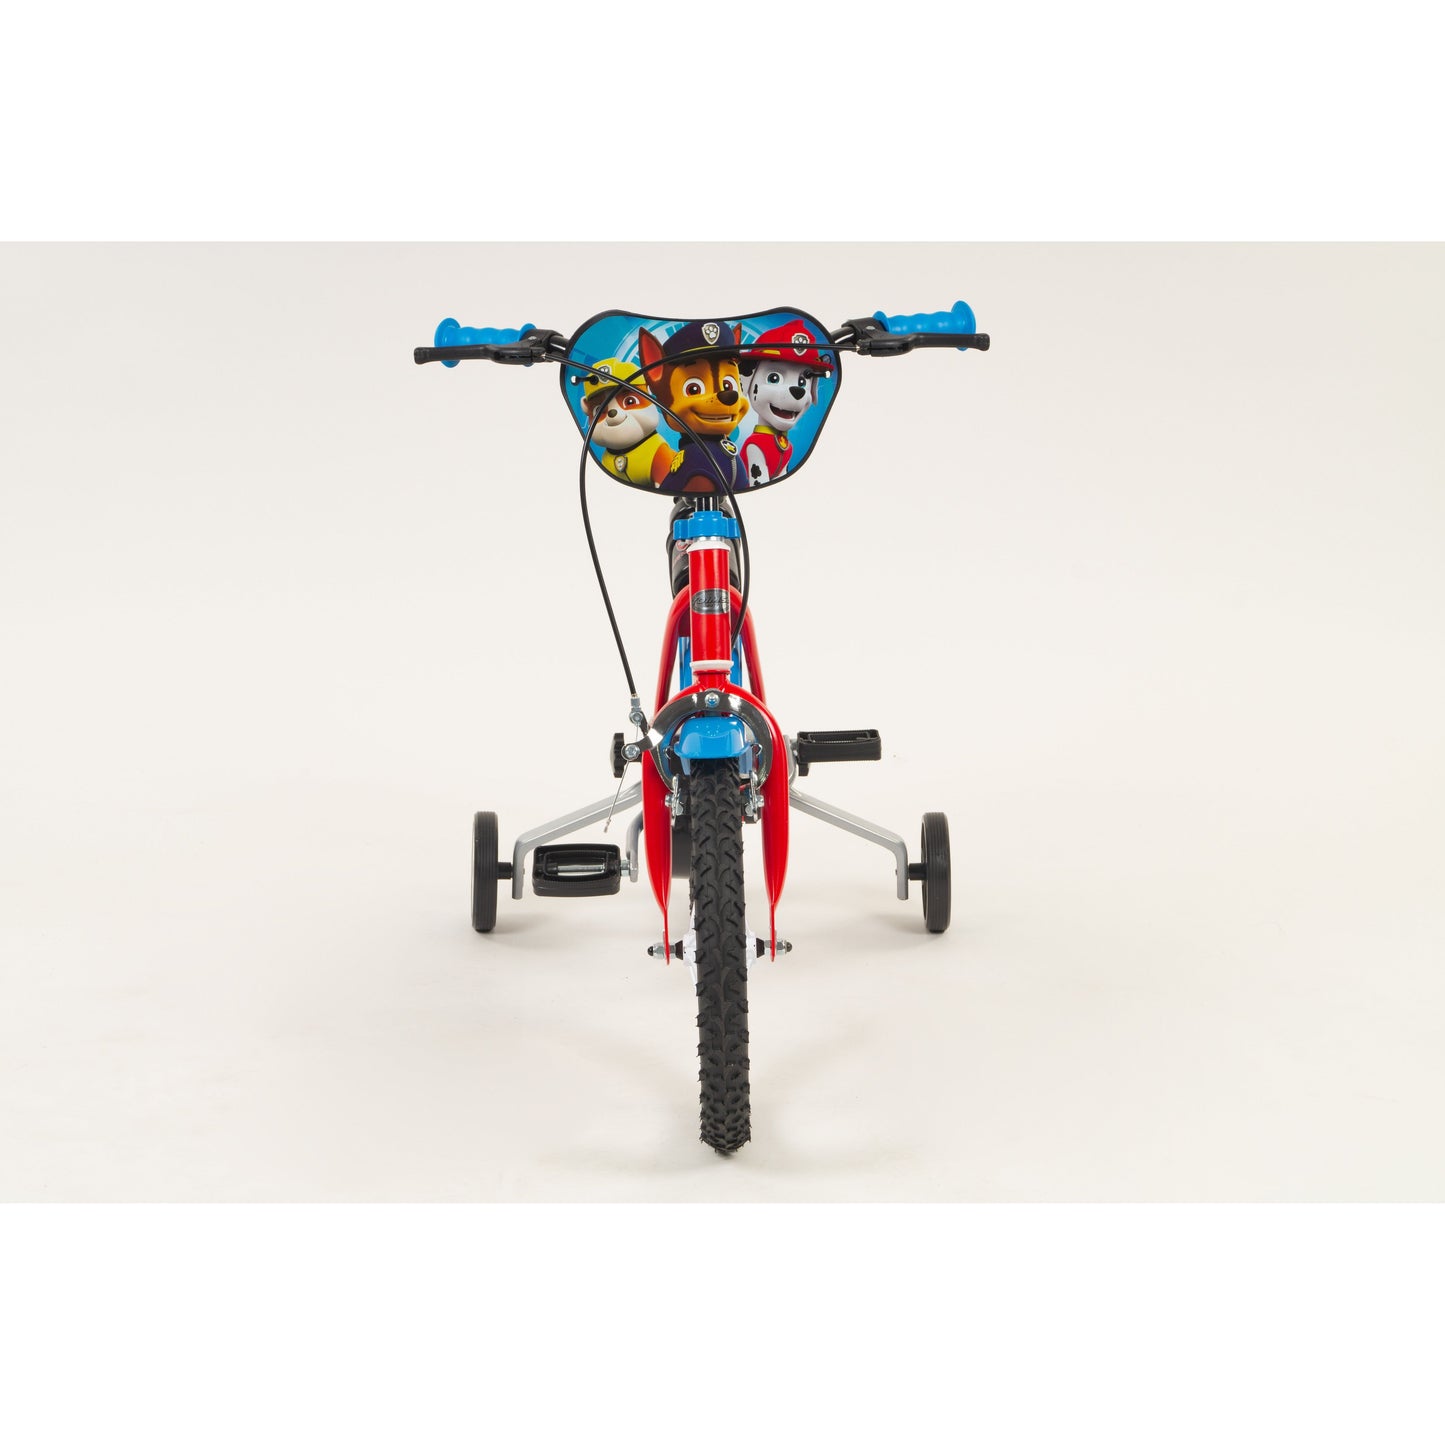 Paw Patrol Childrens Bicycle 14 Inch